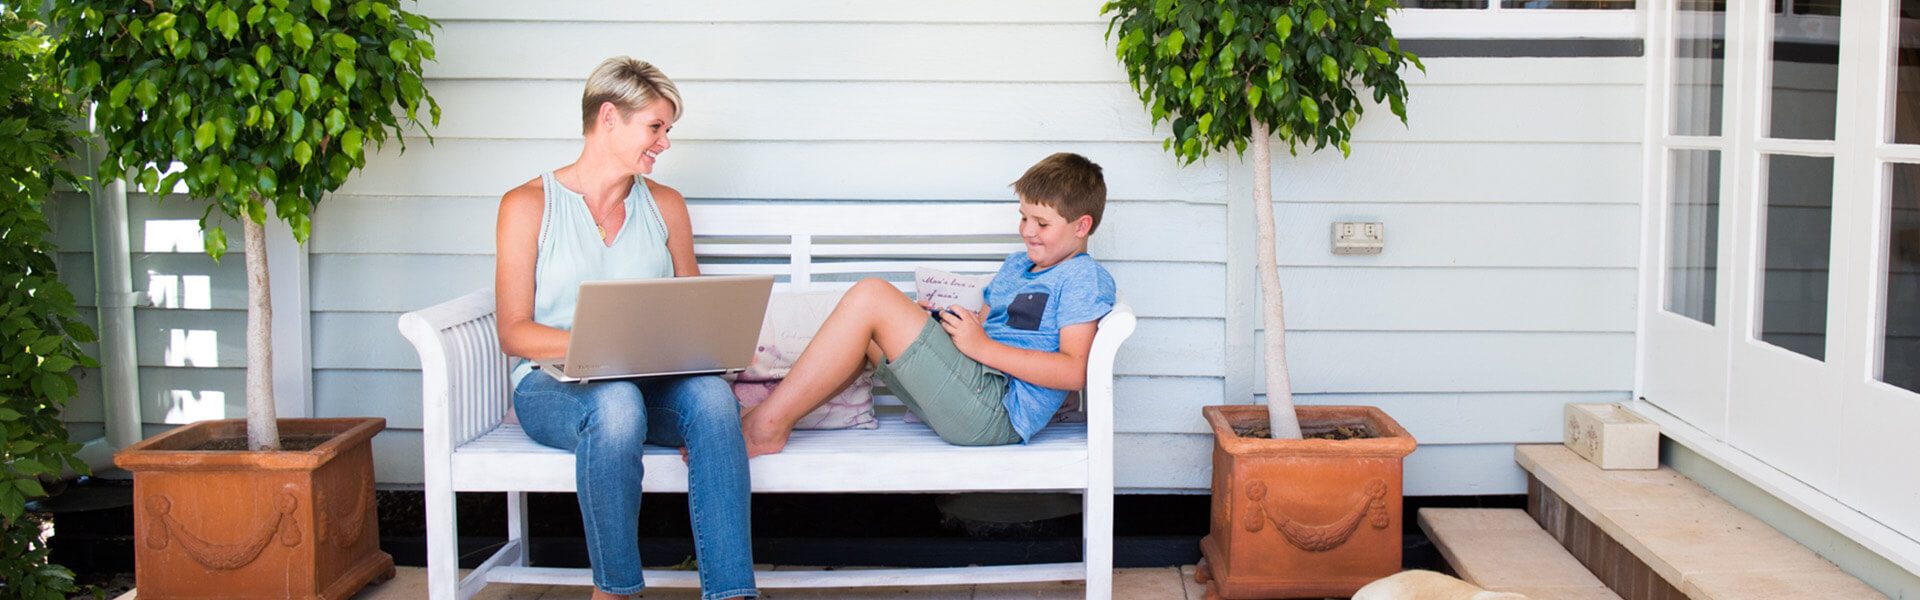 Mother studying with laptop on a bench with her son playing beside her.